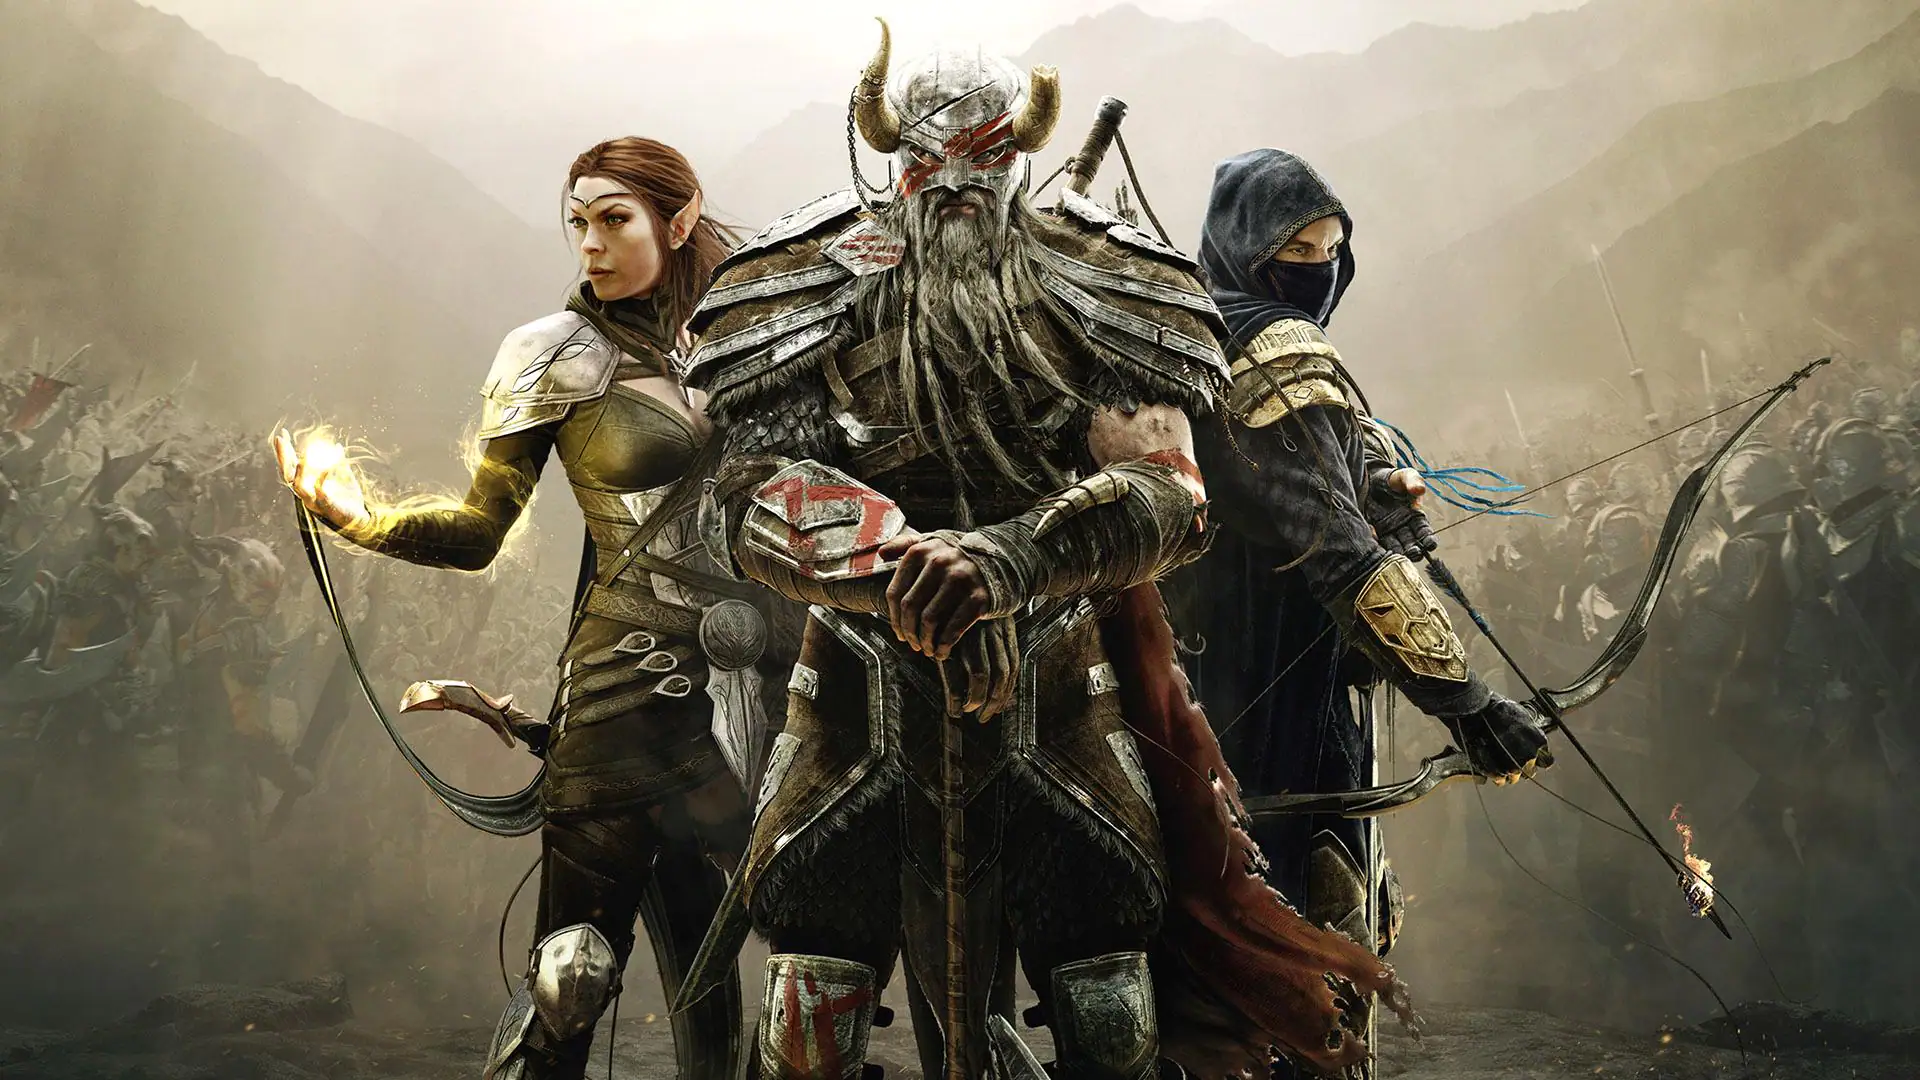 ESO Morrowind PTS Patch Notes v3.0.1